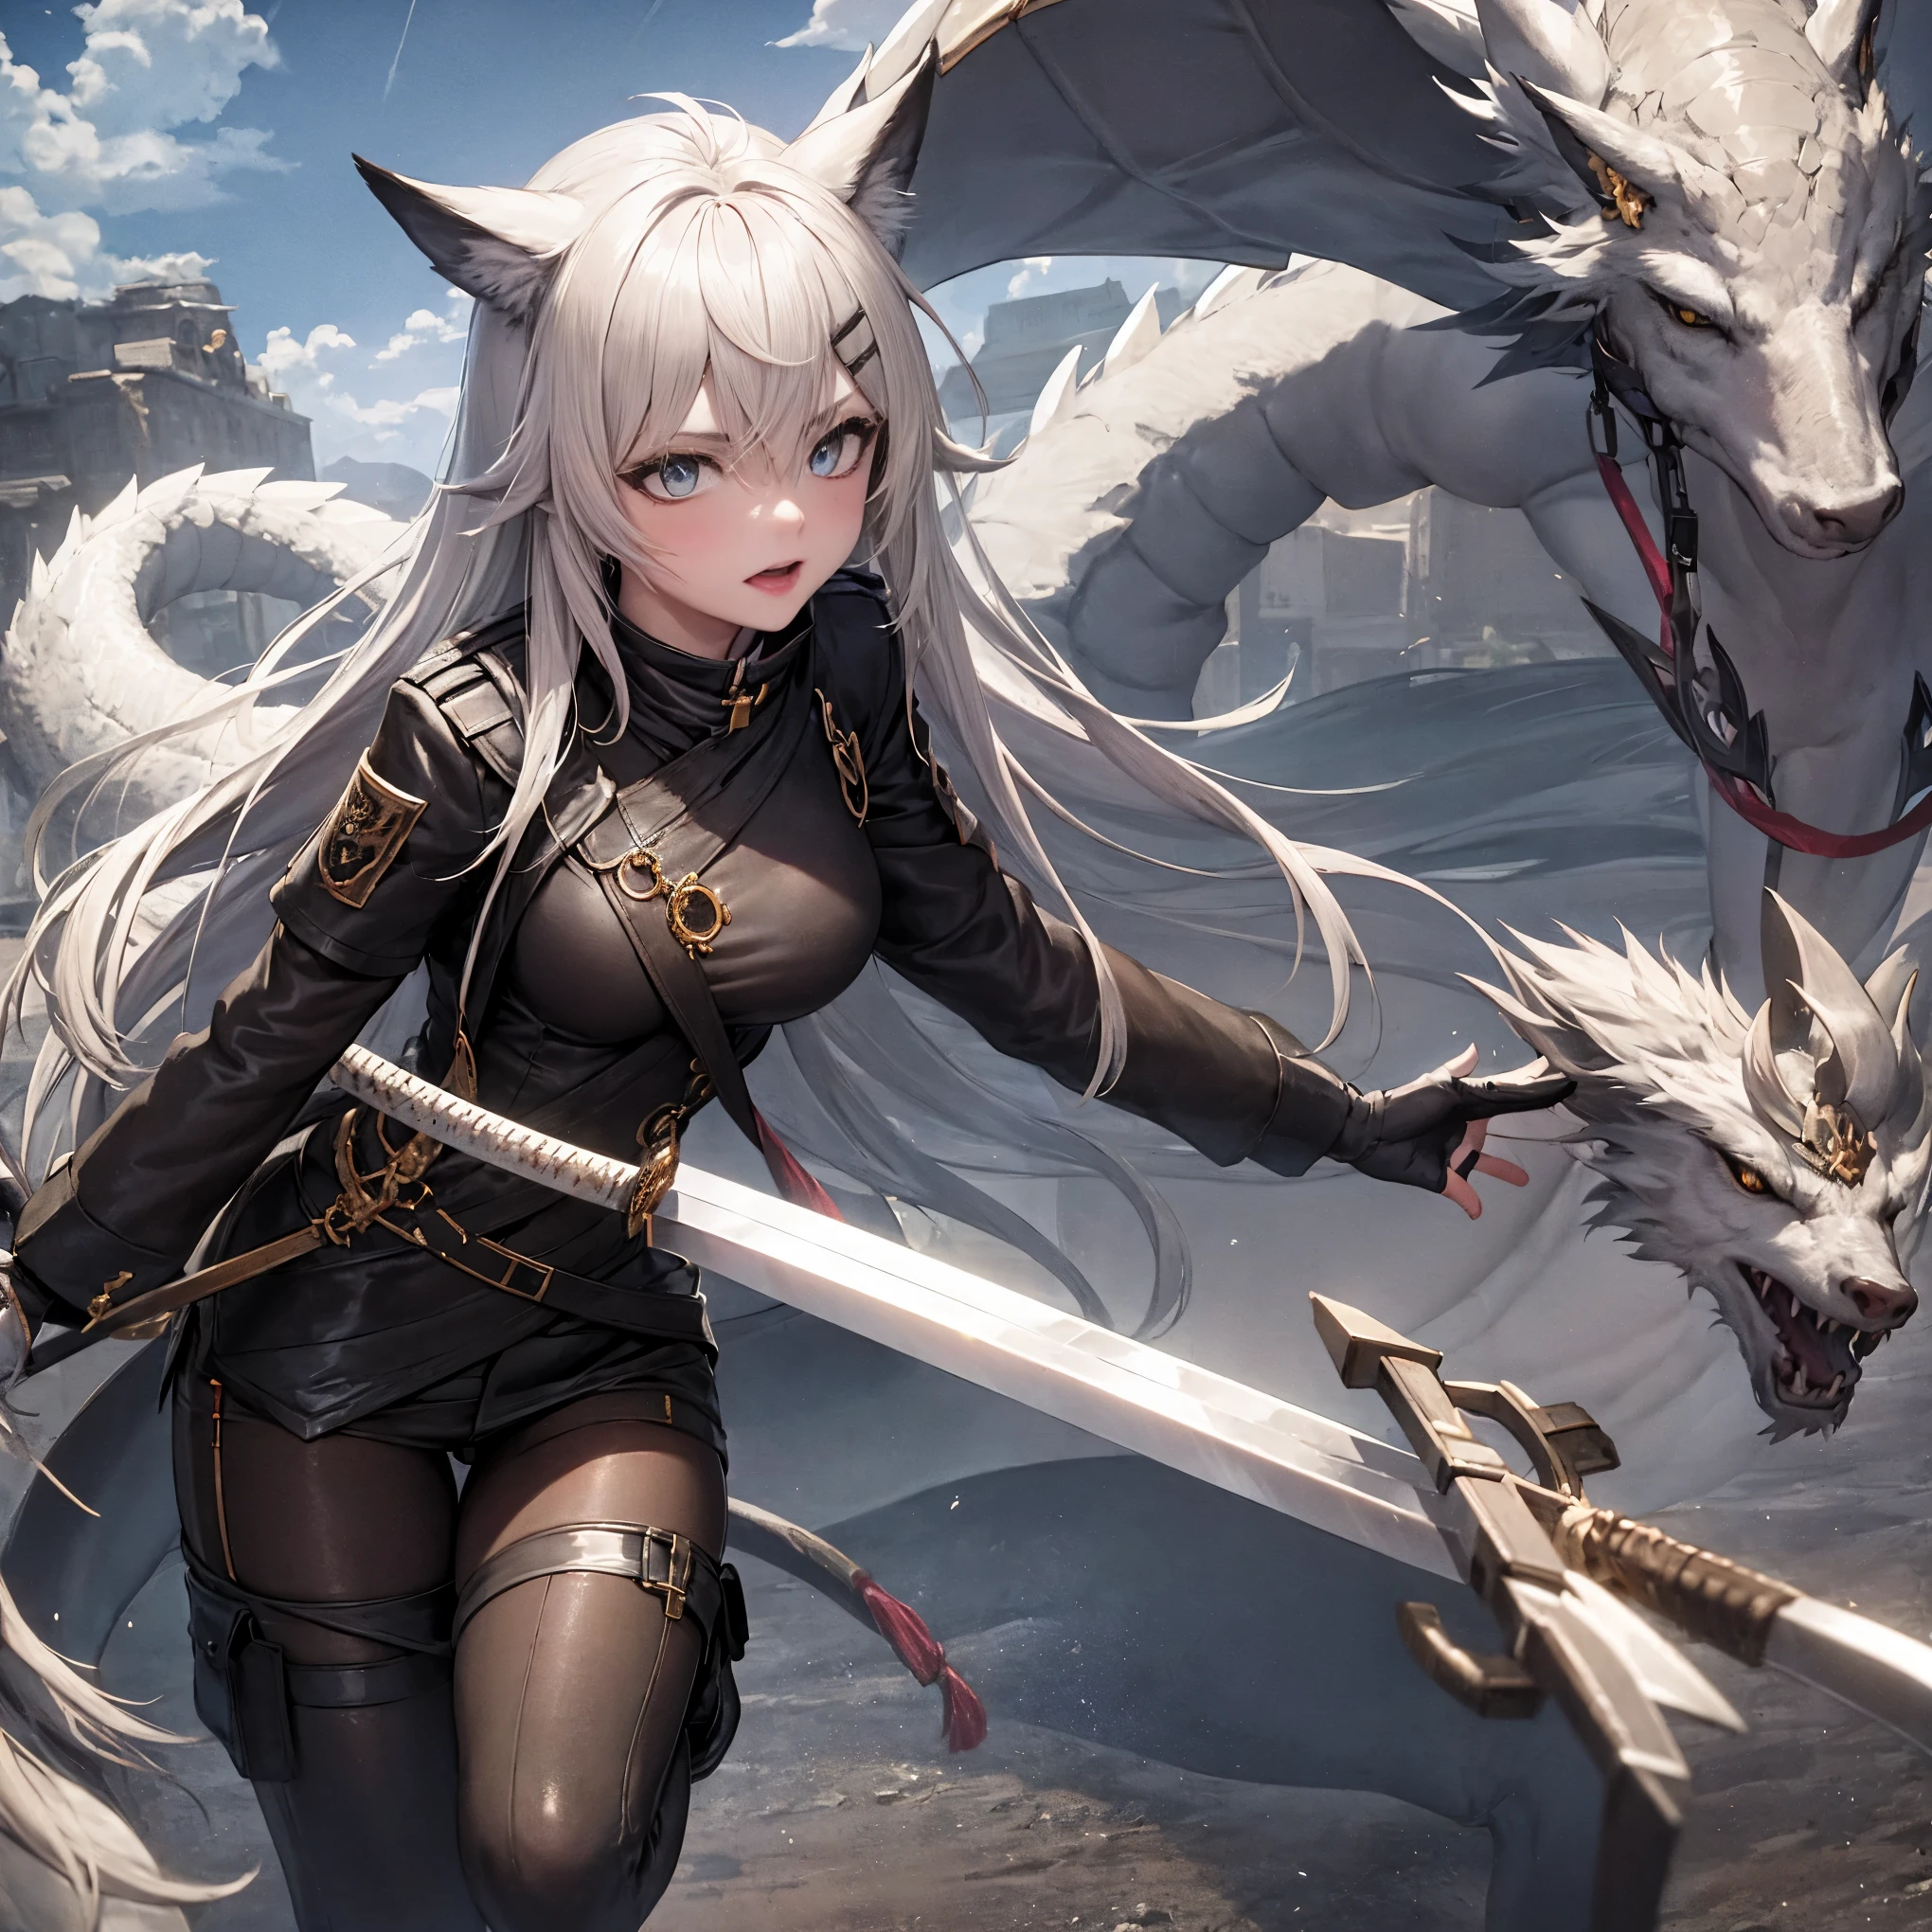 masterpiece, 8k resolution, high quality, high resolution, best quality, extremally detailed, best resolution, absurd resolution, ray tracing, high detailed, masterpiece, extremely detailed,detailed angelic face, shoulder length white hair, female, 2 white fox ears, teenage girl, slime body, white scale dragon tail, military boots,black leggings, military combat pants, black T-shirt, white jacket open, medium size chest, detailed blue eyes,solo female,1 dragon tail, tomboyish, thick dragon tail, white scales, 2 dragon wings, white fluffy dragon wings, detailed face, holding a katana sword,very detailed, amazing details,solo female, 1 female, detailed white fur dragon wings